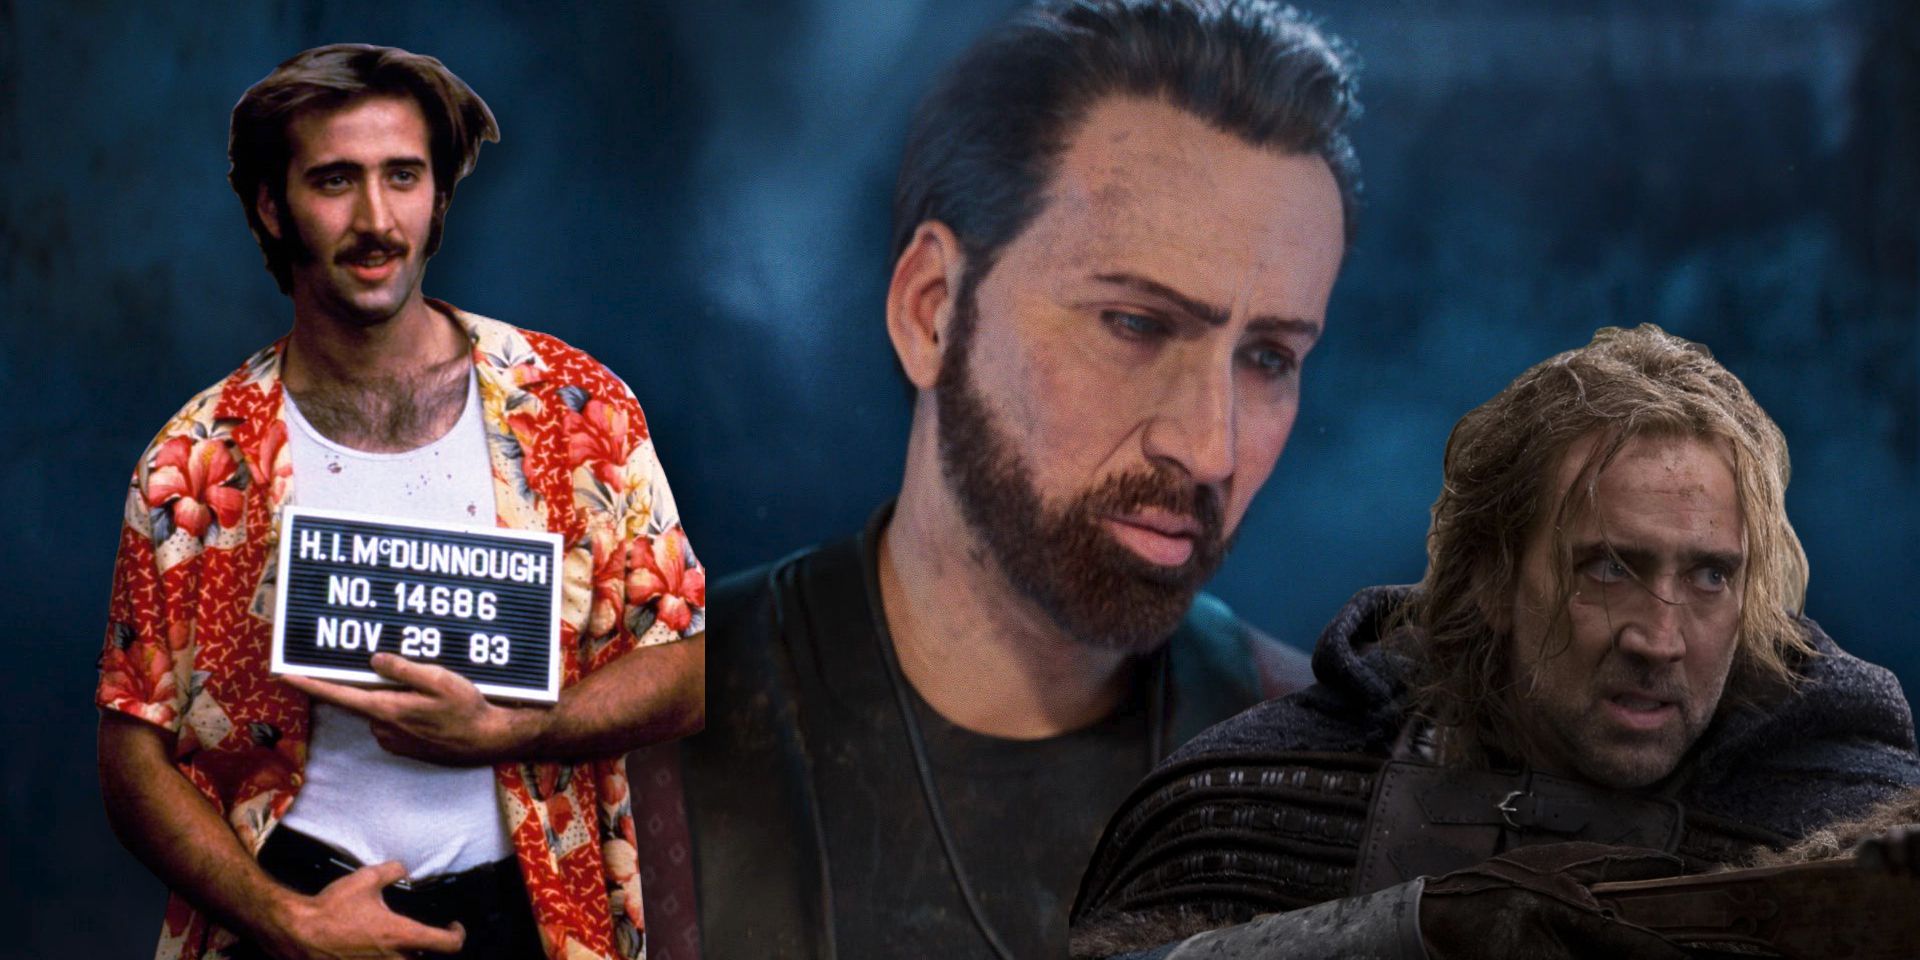 A collage of Nicolas Cage characters: a mugshot of H.I. McDunnough in Raising Arizona, a contemplative Nicolas Cage (as himself) in DBD, and the knight Behmen with a crossbow in Season of the Witch.